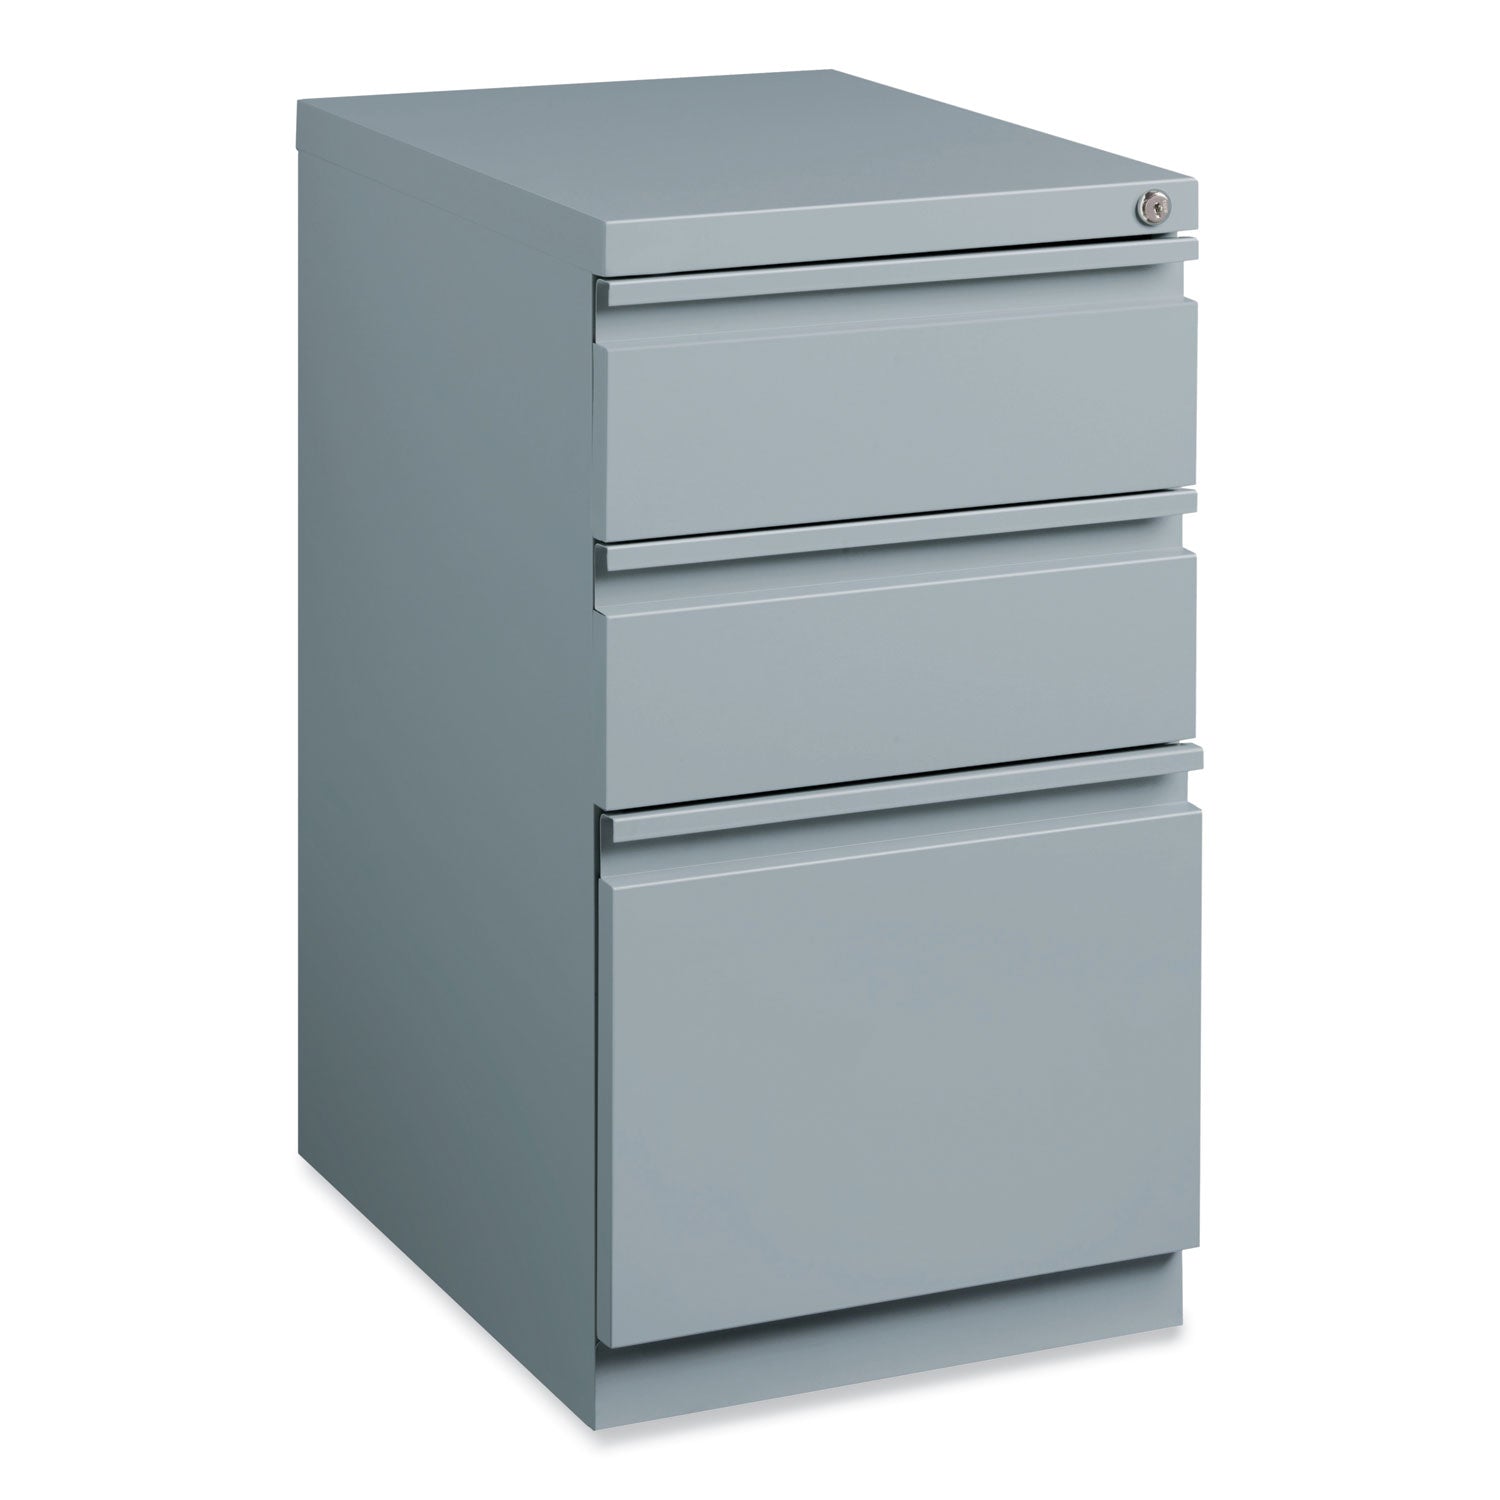 full-width-pull-20-deep-mobile-pedestal-file-box-box-file-letter-platinum-15-x-1988-x-2775-ships-in-4-6-business-days_hid21856 - 1